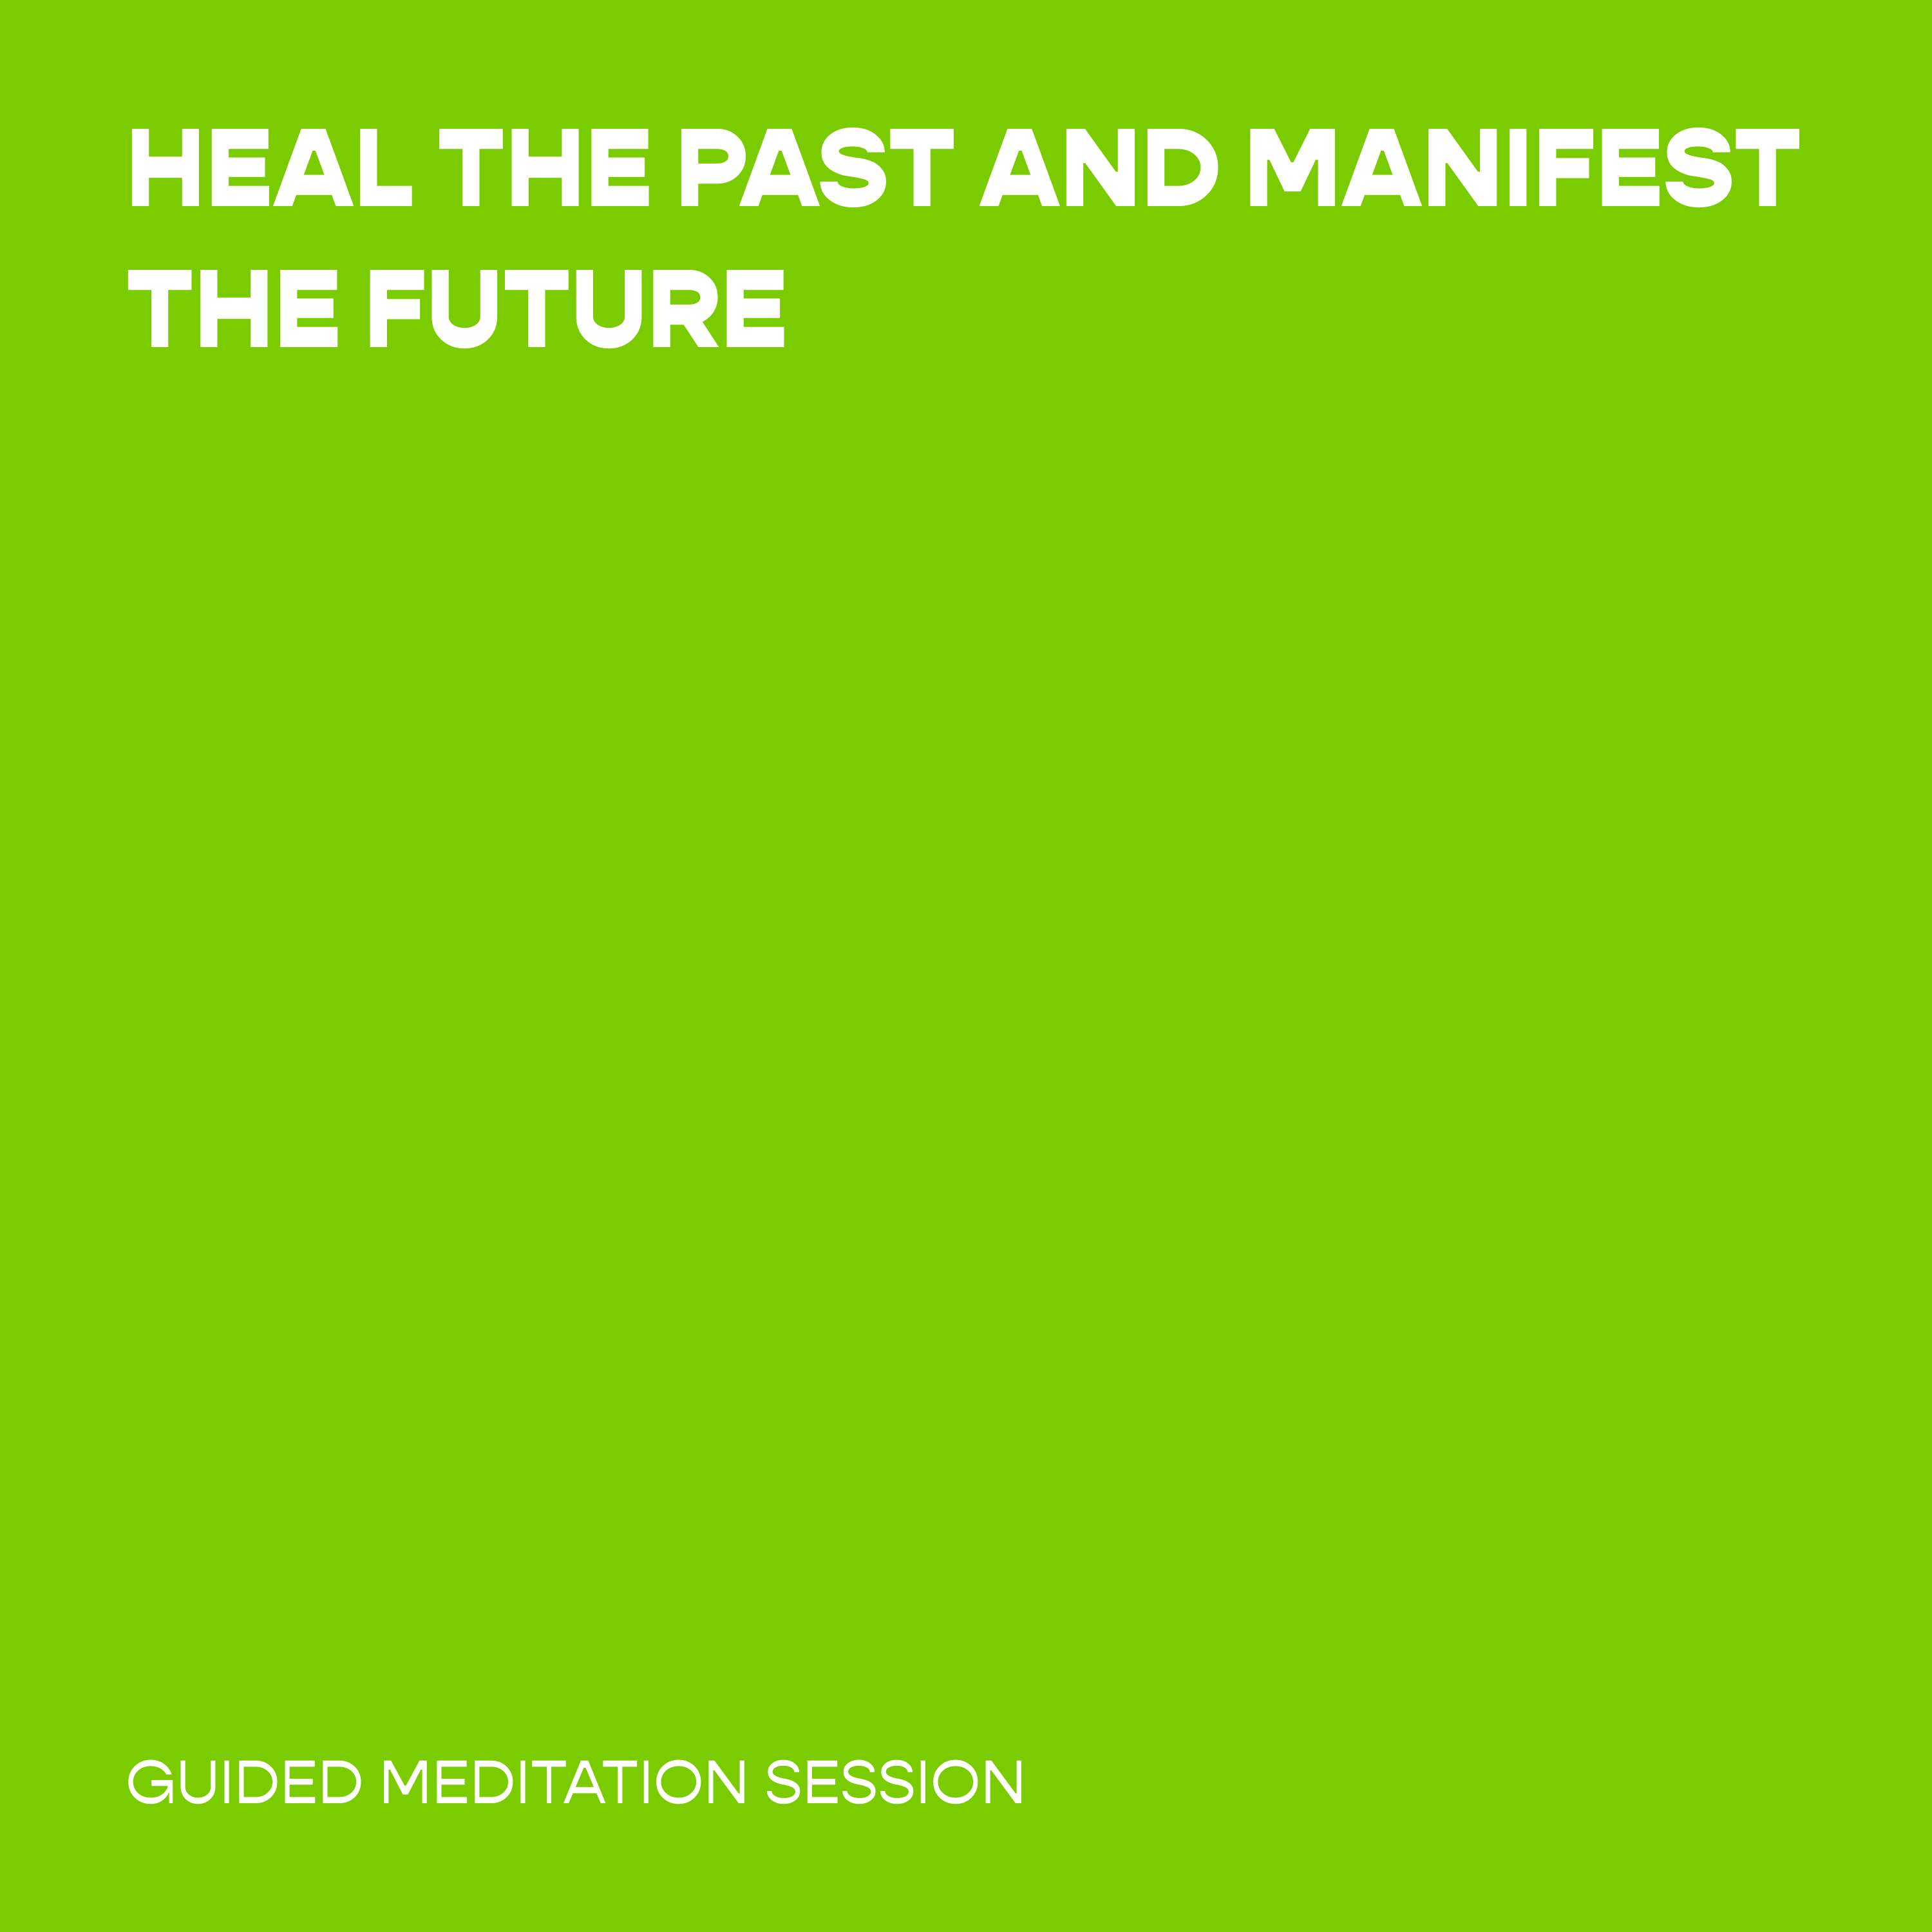 Heal the Past and Manifest the Future